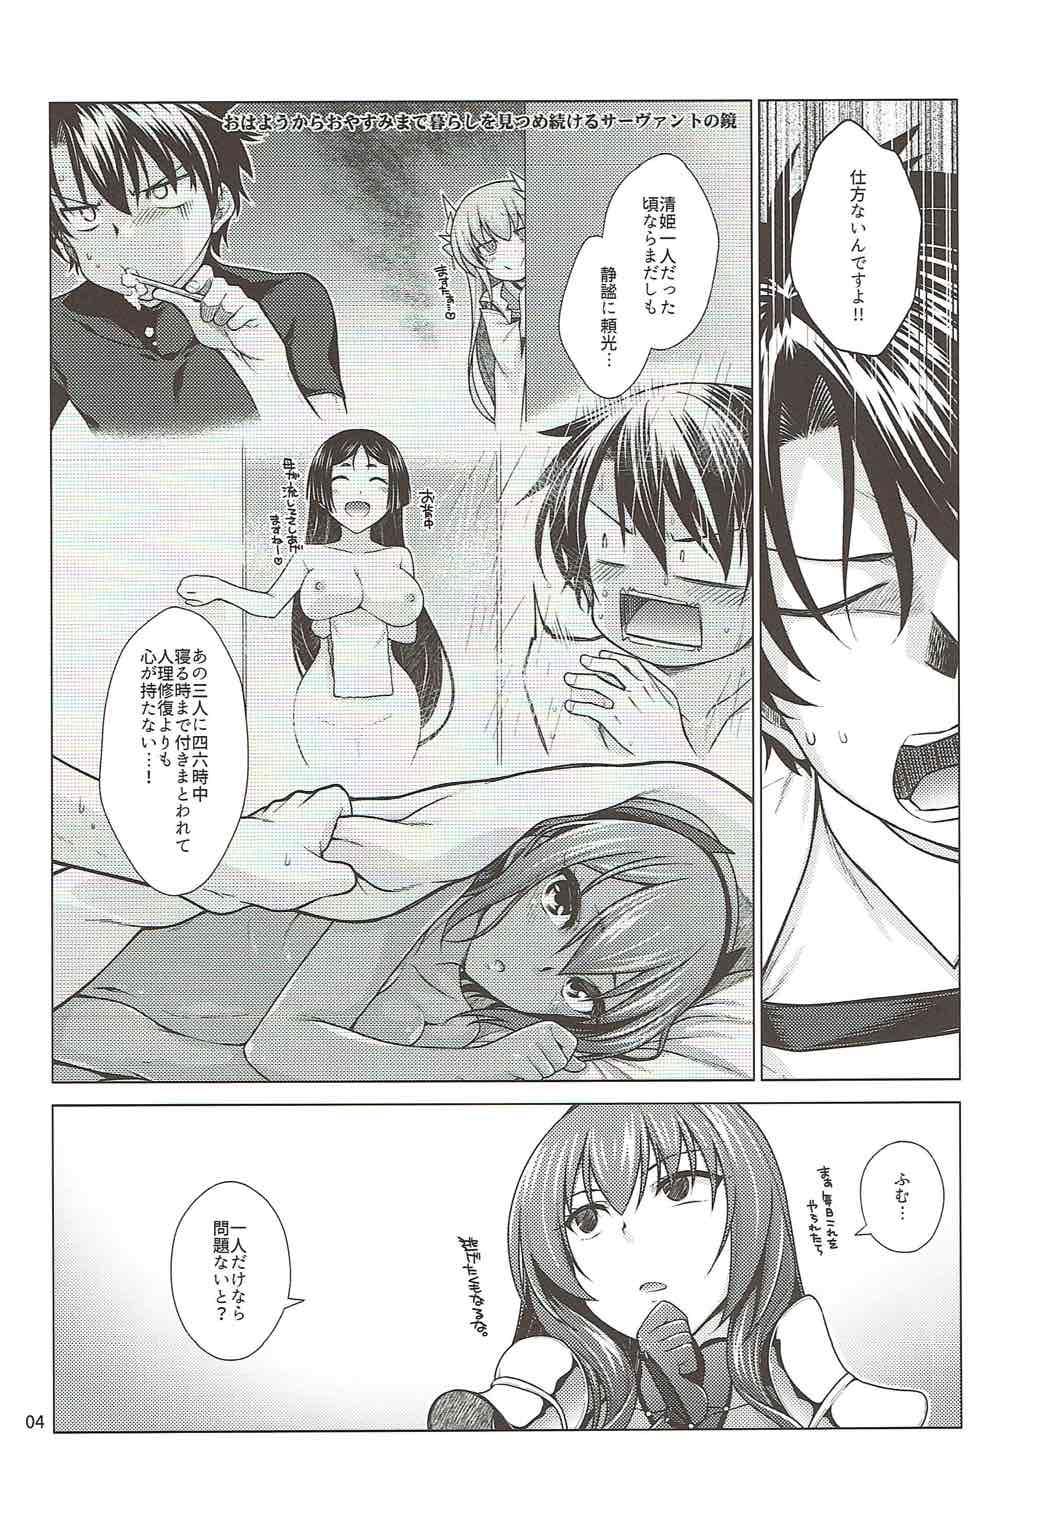 Public Sex Scathach Shishou to Celt Shiki Gachihamex! - Fate grand order Cheating - Page 3